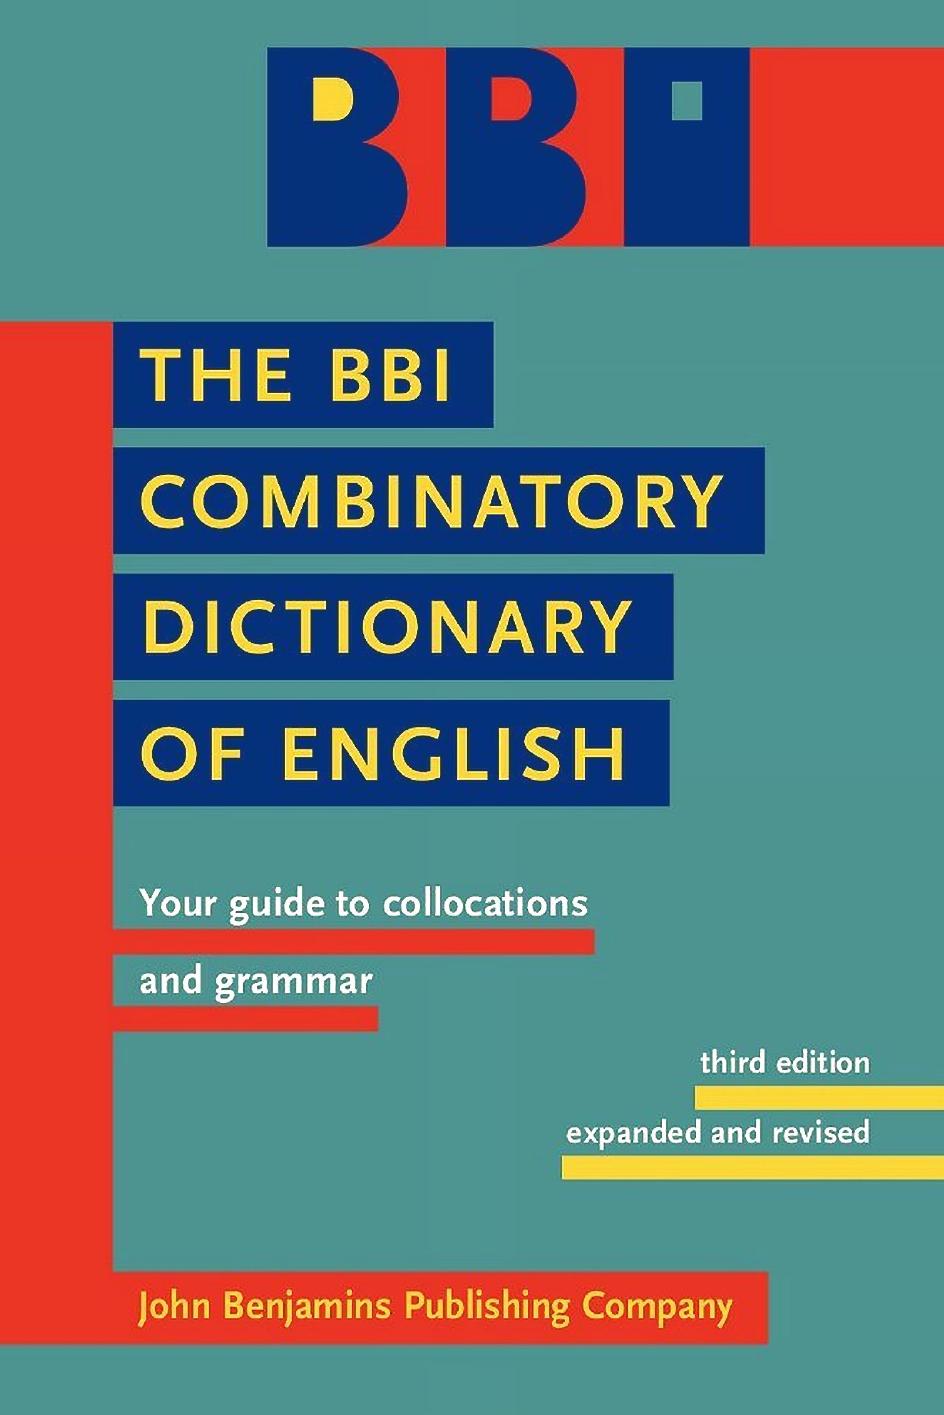 The BBI Combinatory Dictionary of English: Your Guide to Collocations and Grammar